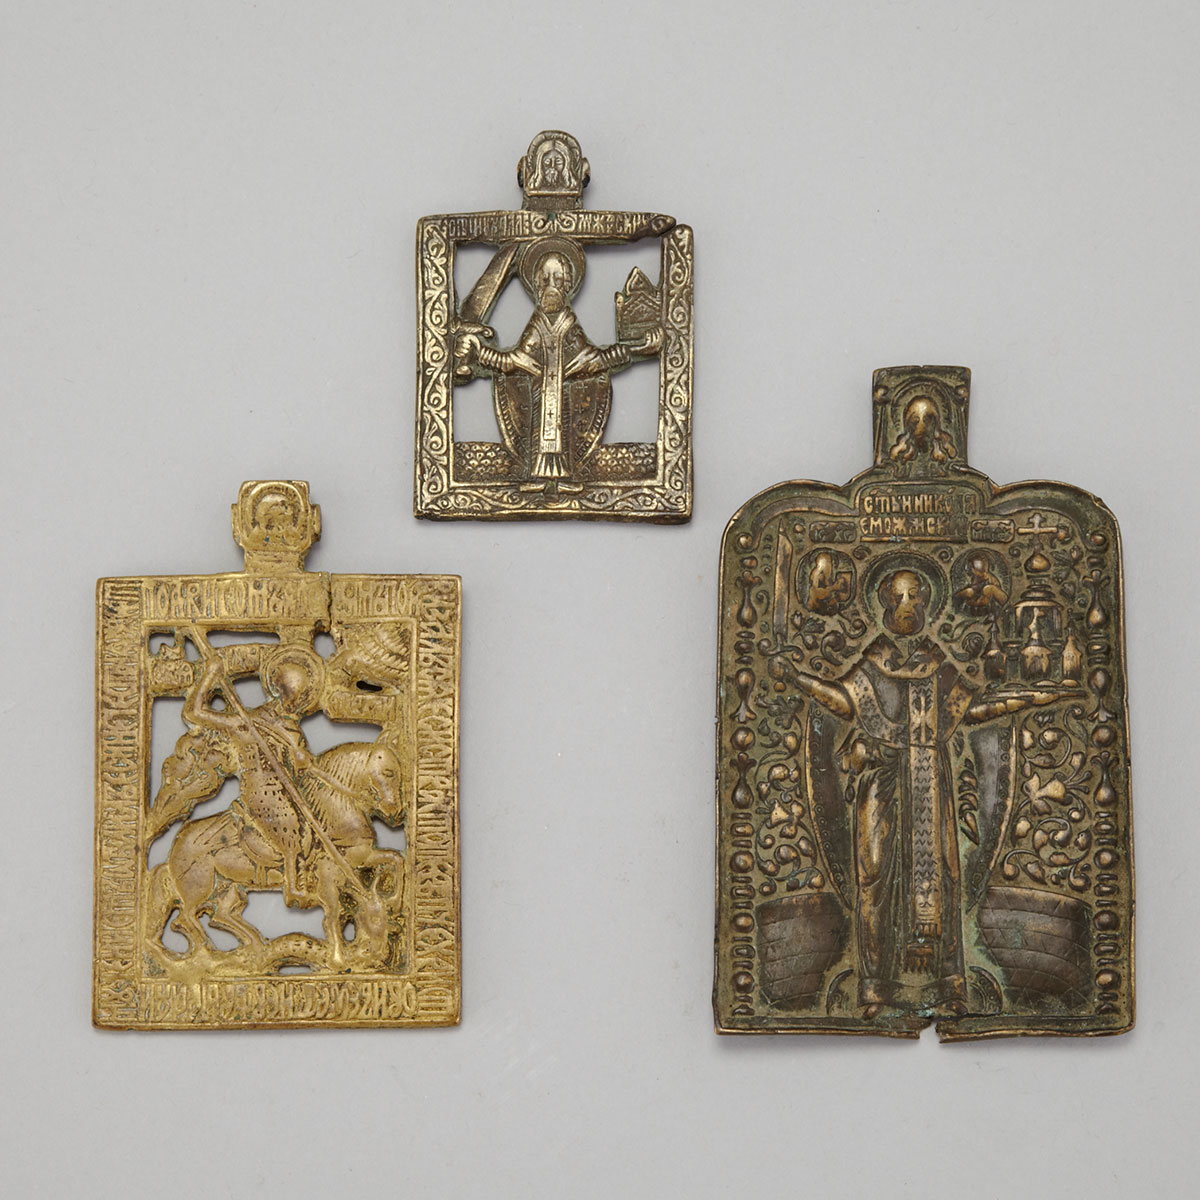 Group of Three Russian Bronze Travelling Icons, 18th/19th centuries